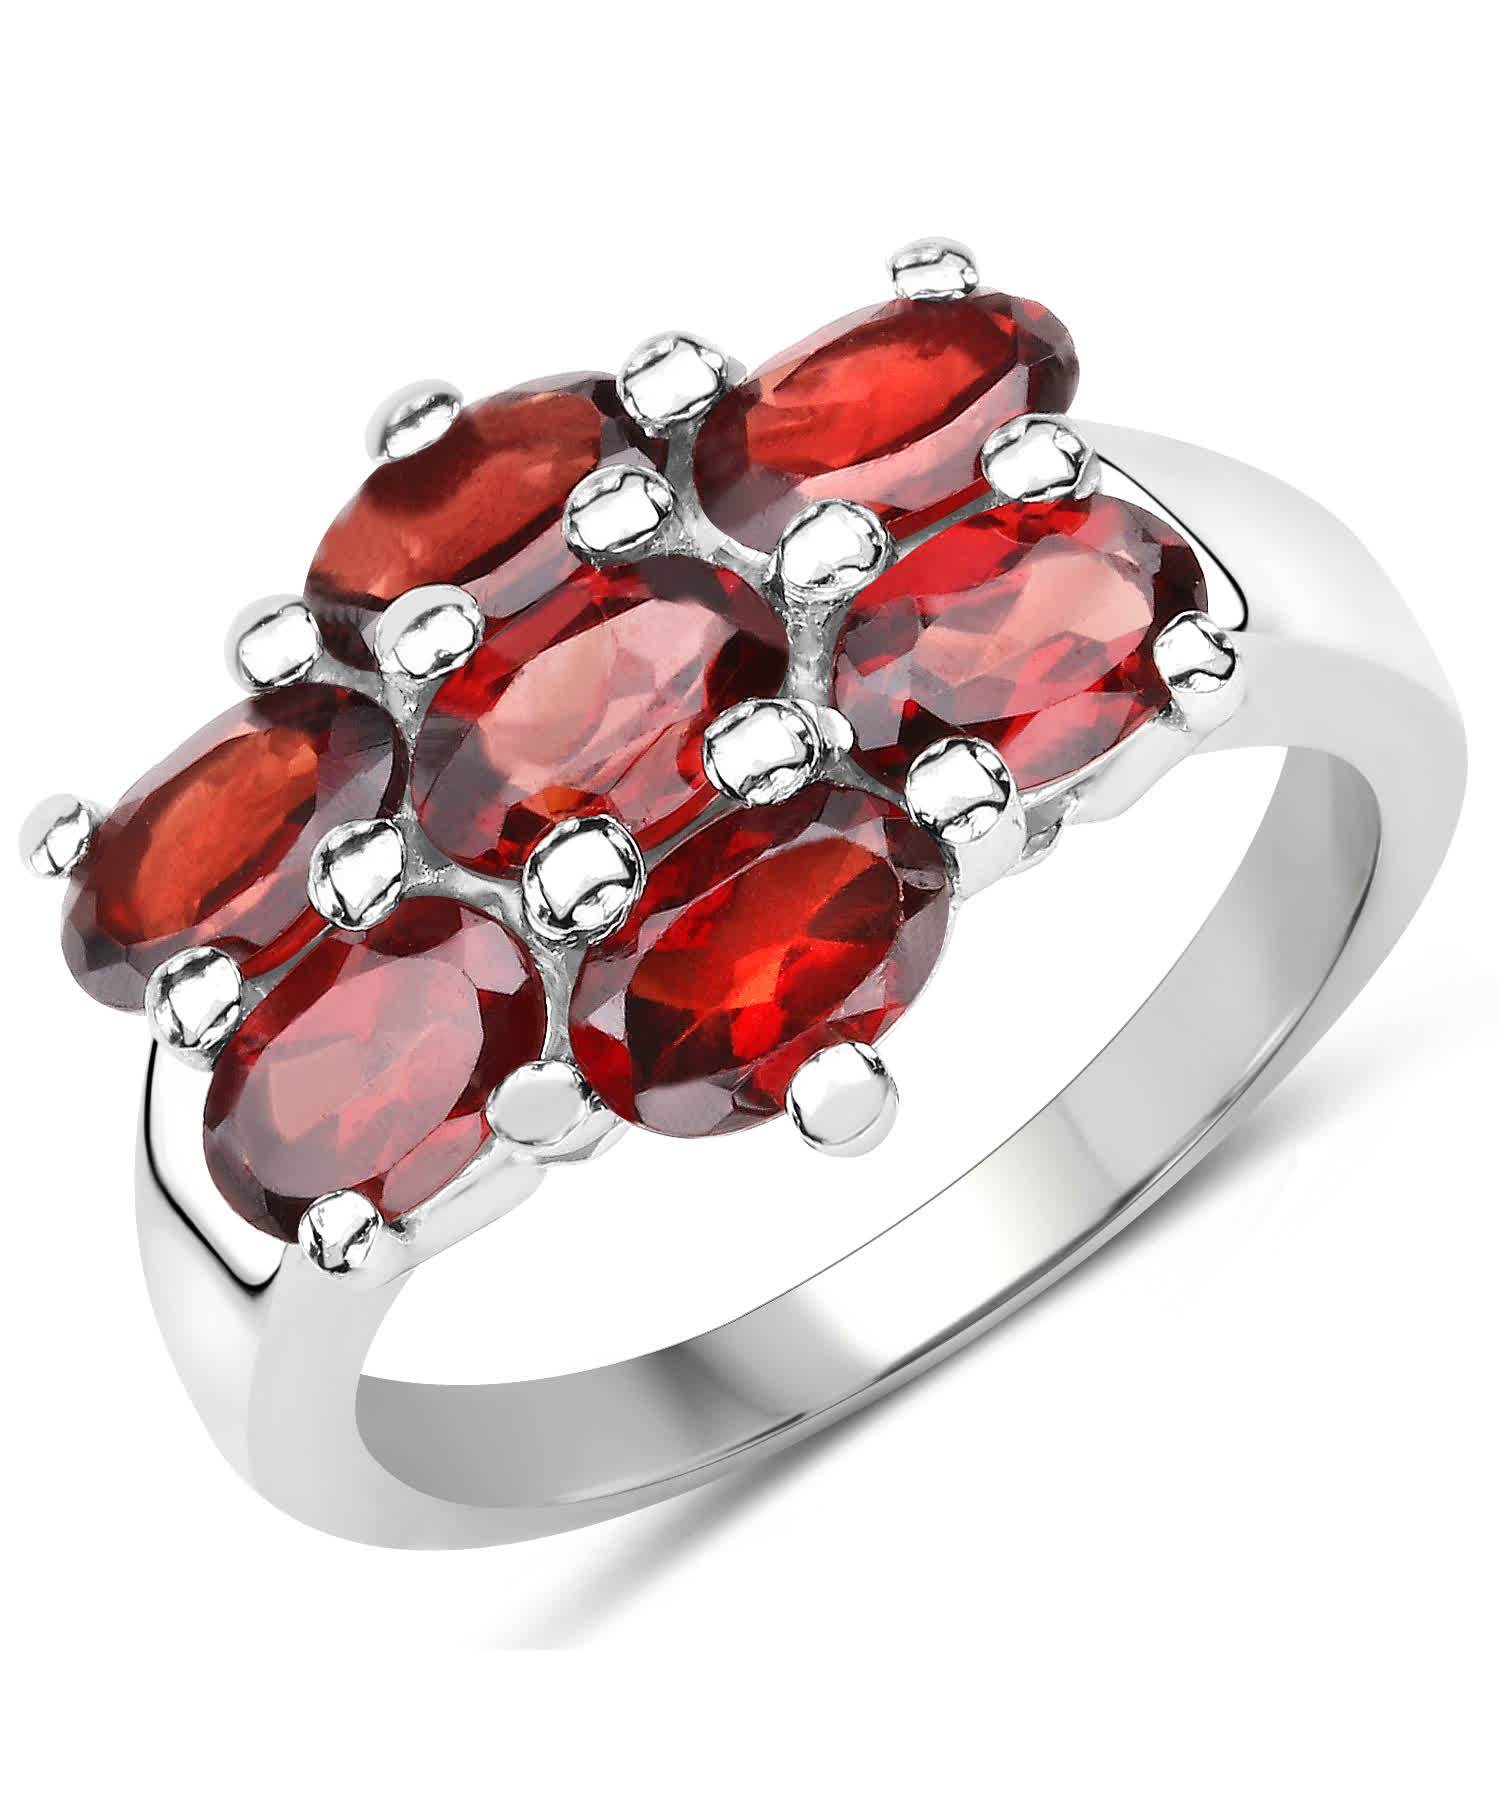 3.57ctw Natural Garnet Rhodium Plated 925 Sterling Silver Fashion Ring View 1